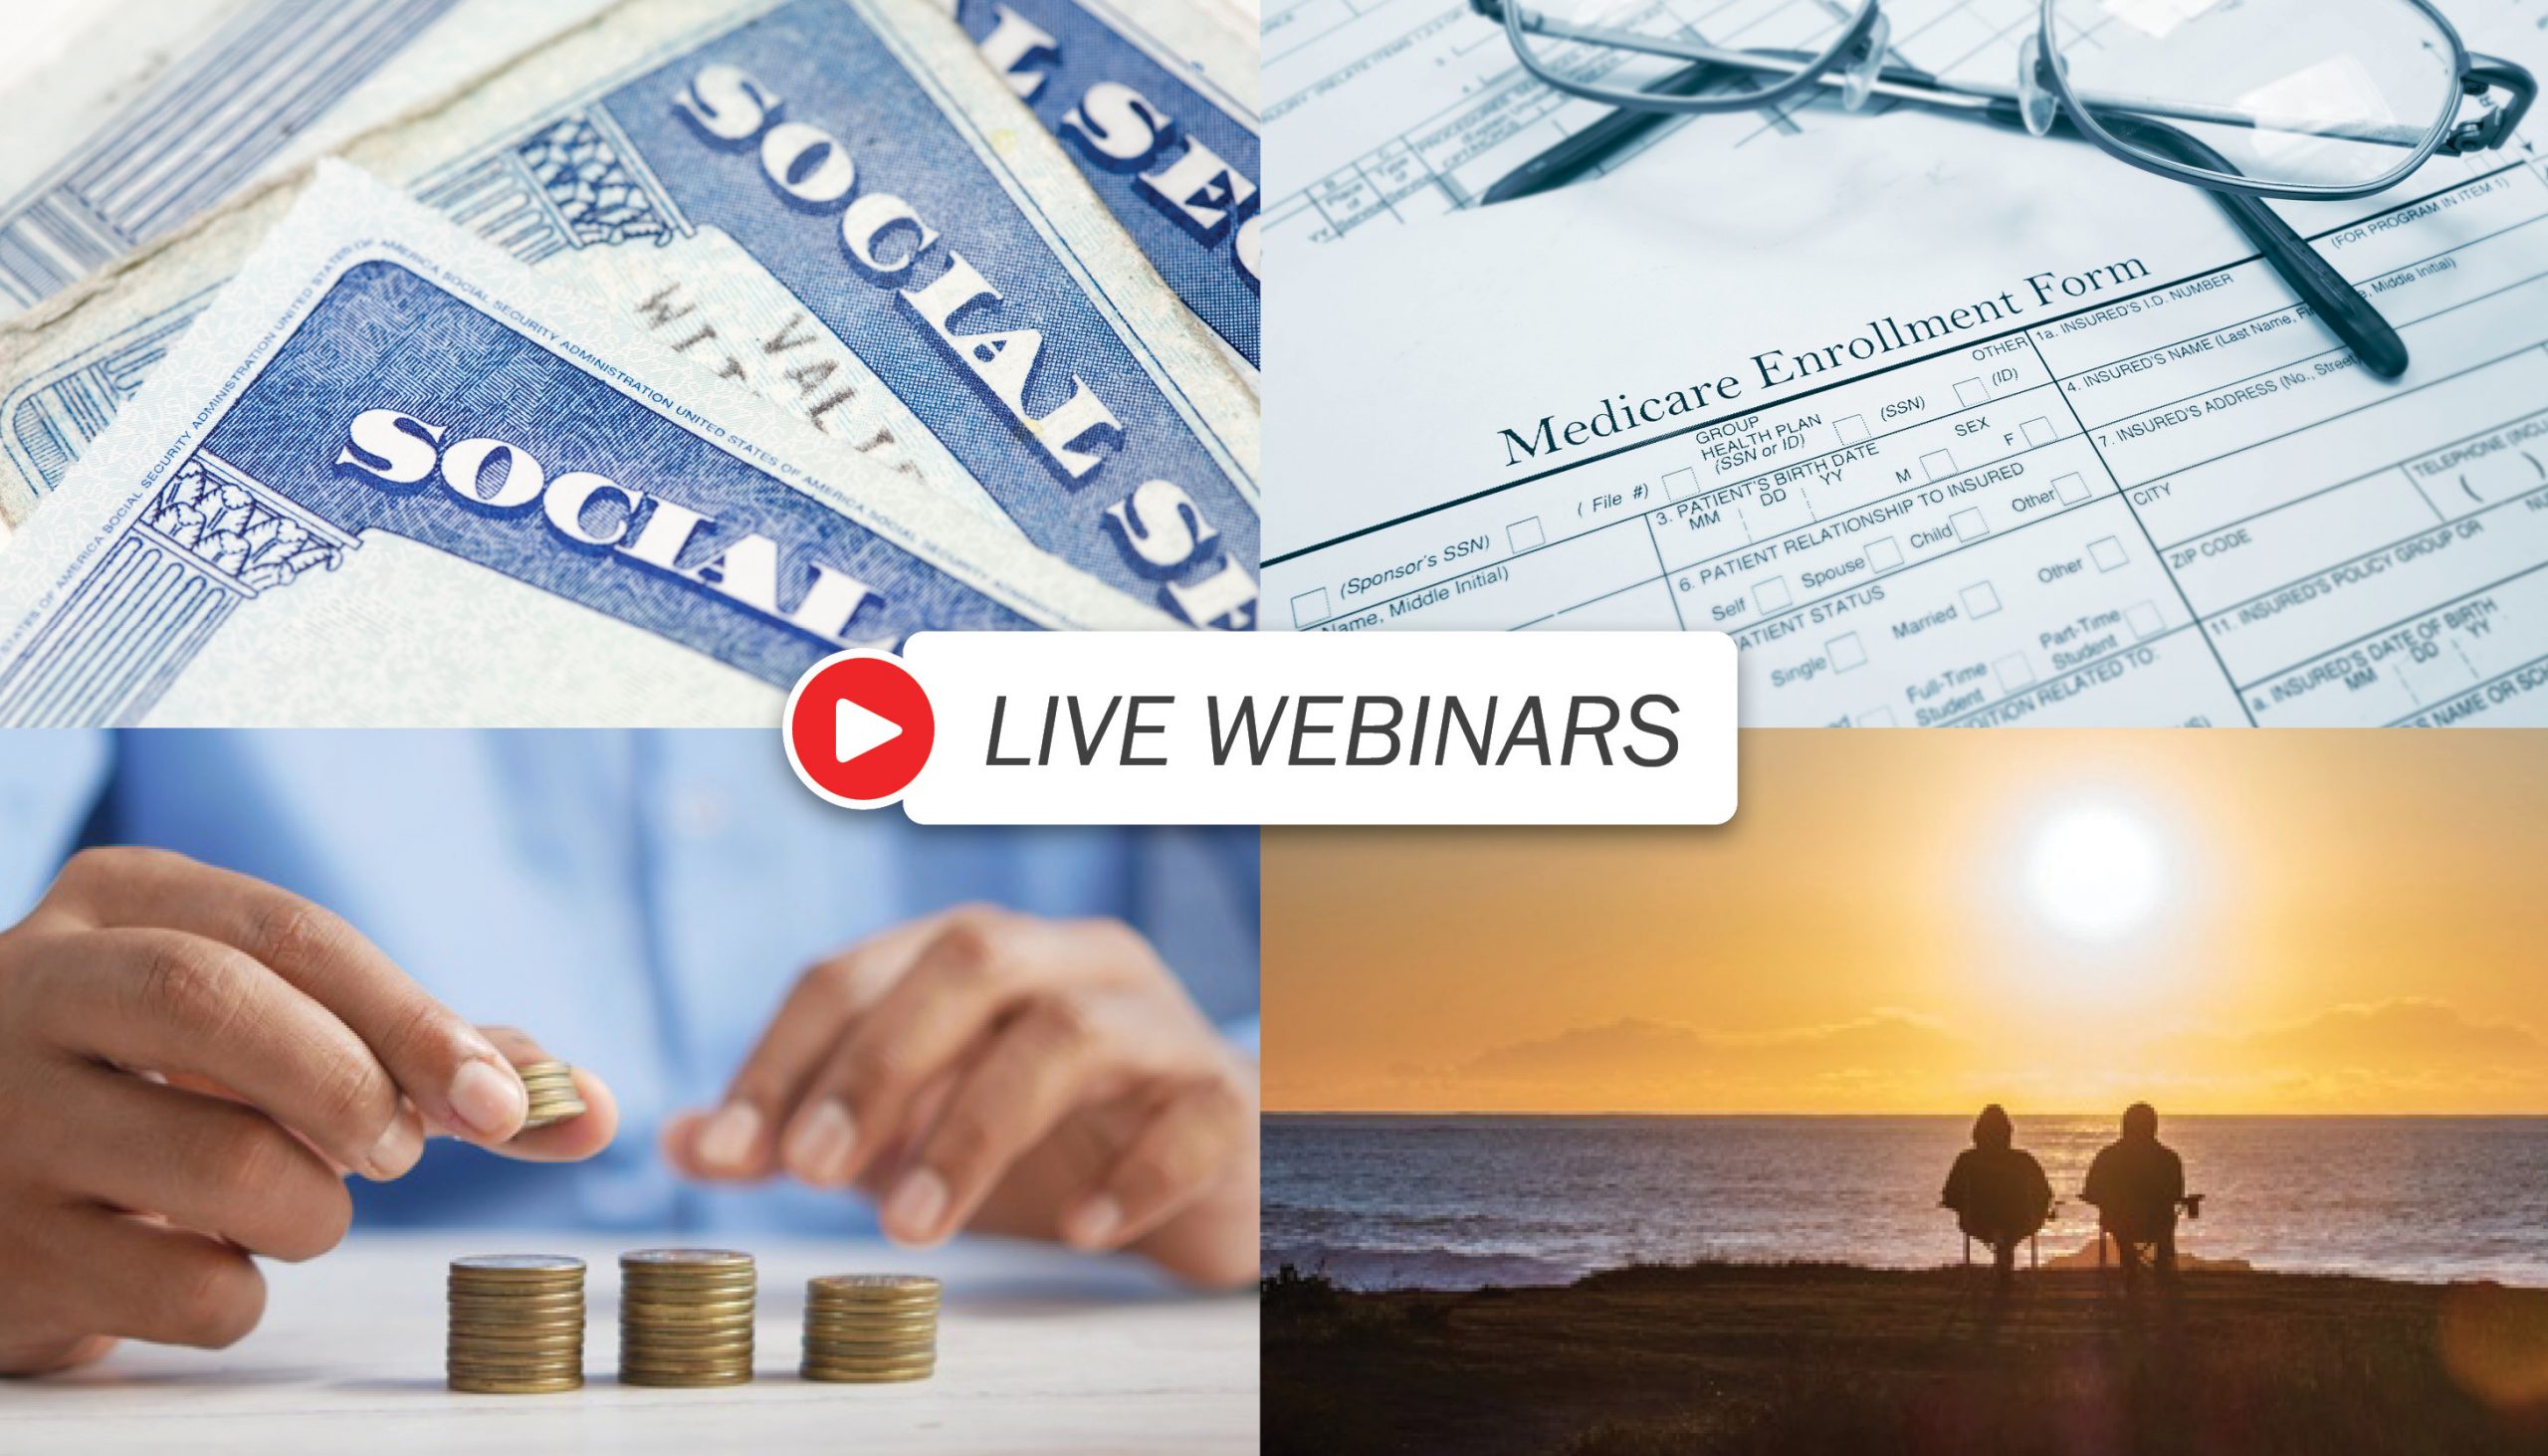 Live Webinars - with images of Social Security cards, Medicare forms